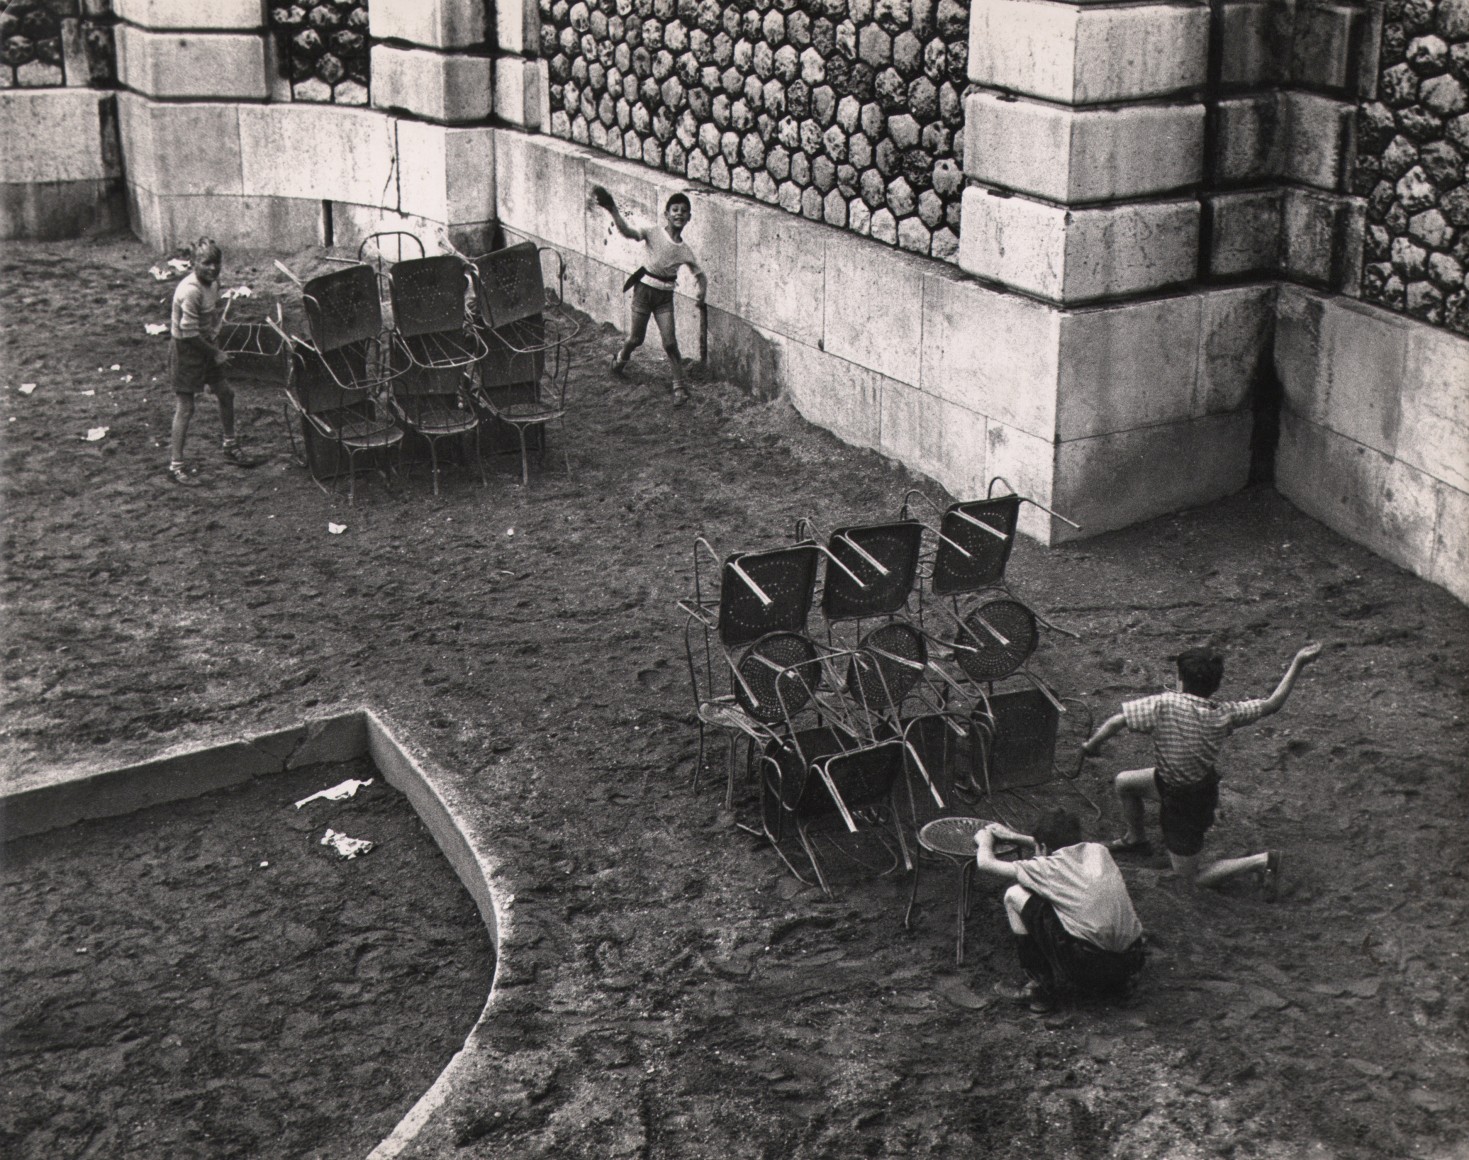 44. Sabine Weiss, La guerre aux pied du &quot;Sacre Coeur,&quot; Paris, c. 1950. Four young boys play war on a lawn, with to barricades made of stacked chairs.